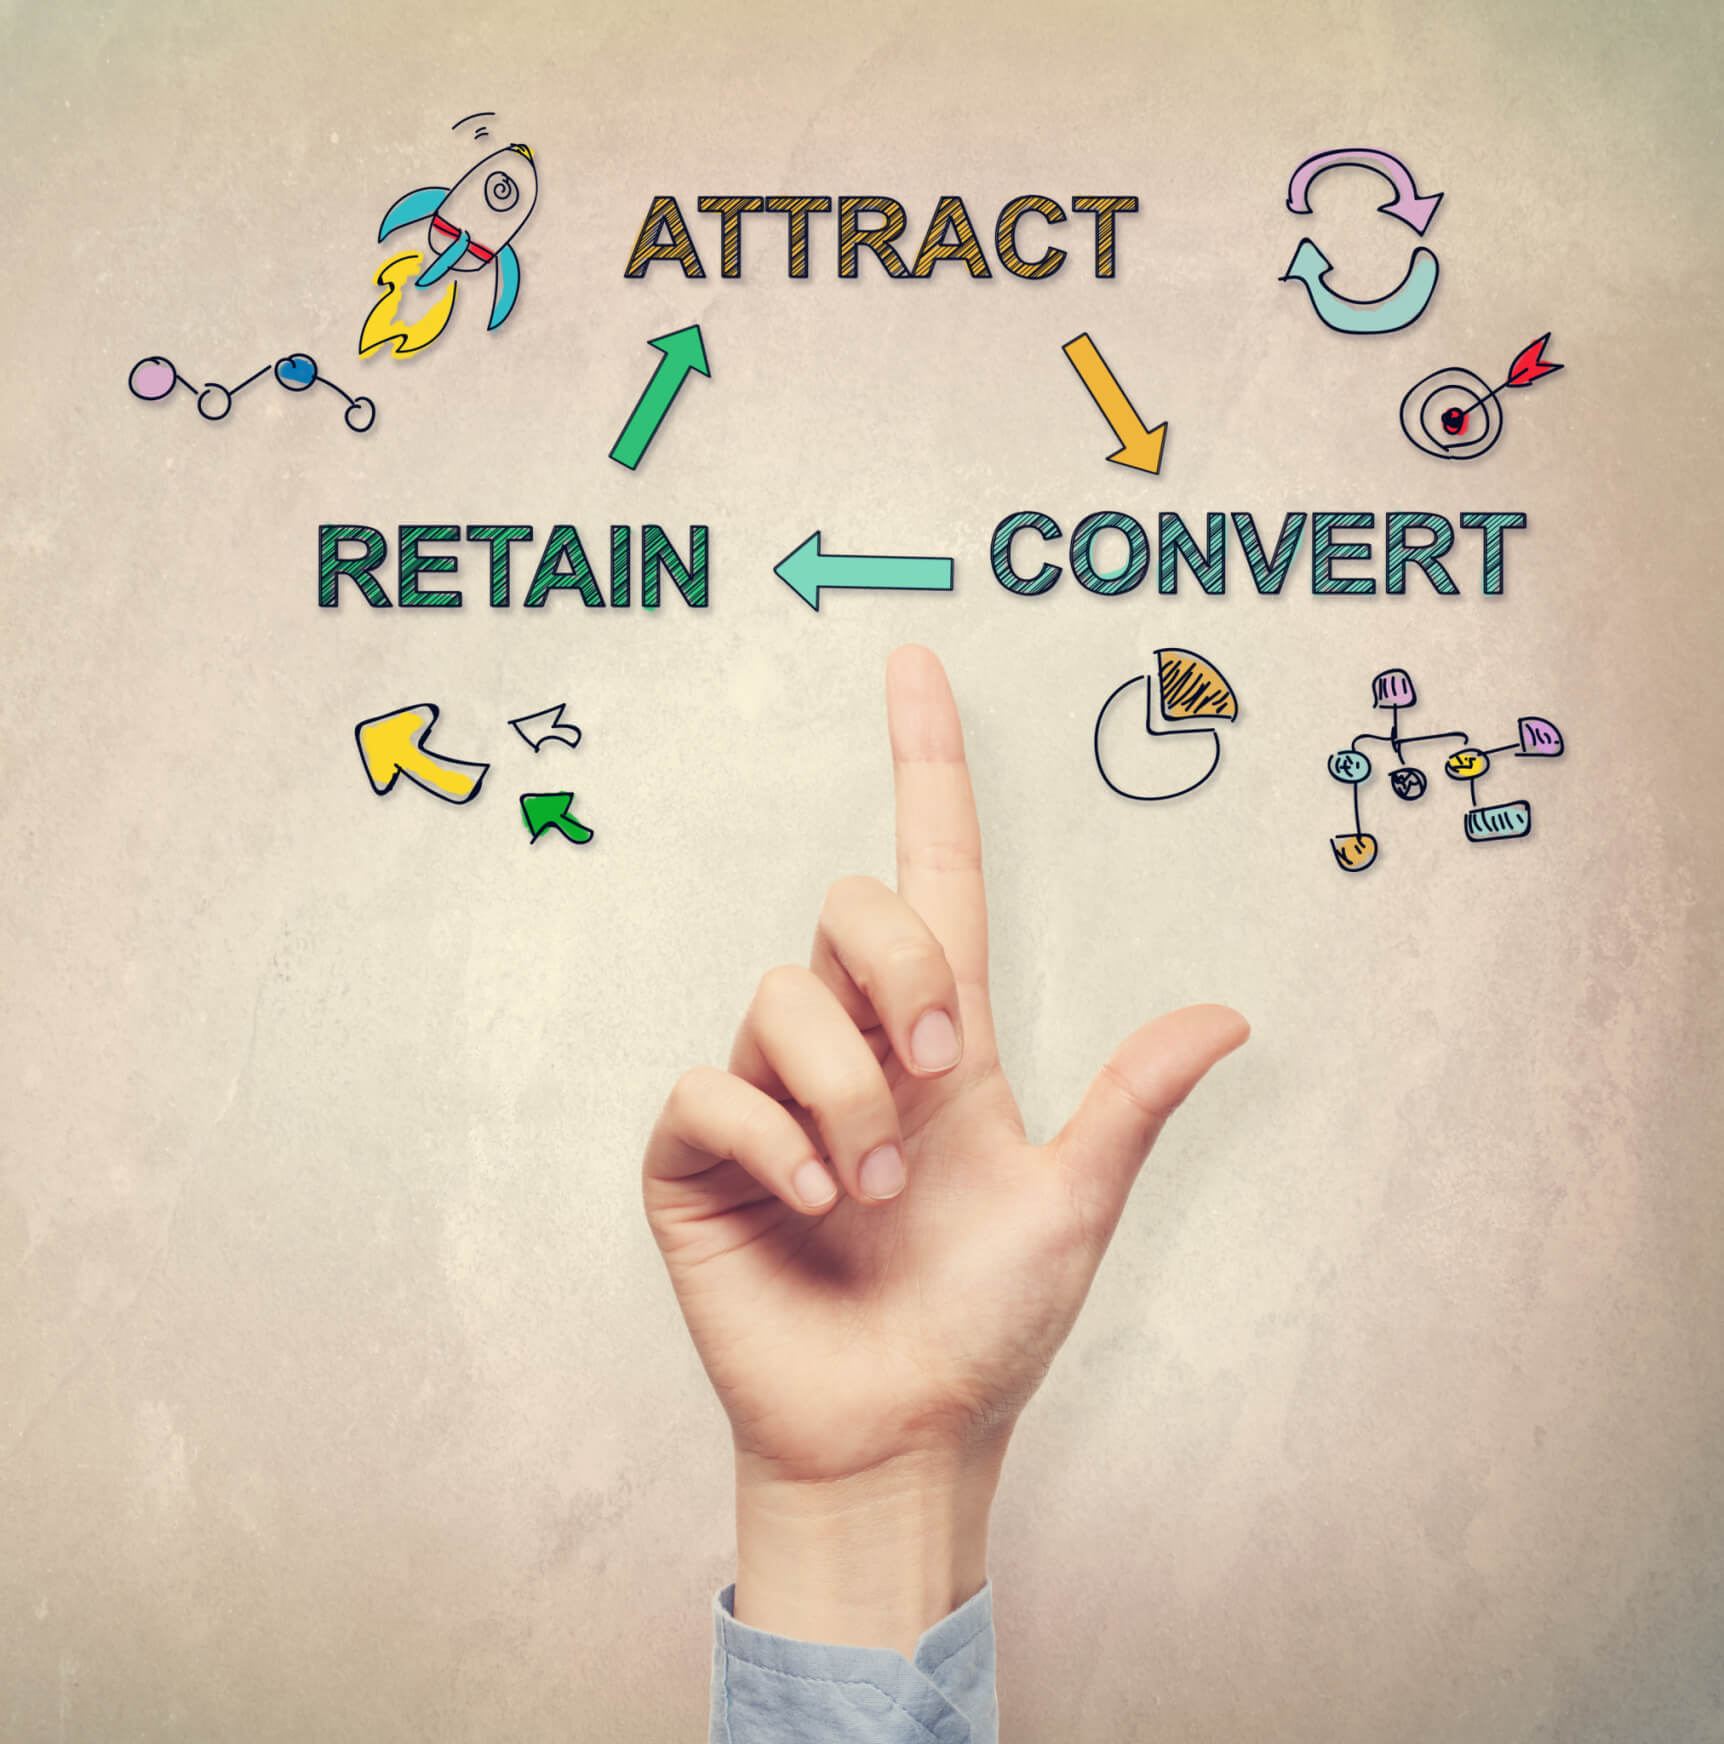 7 Easy To Implement Strategies For Acquiring New Customers